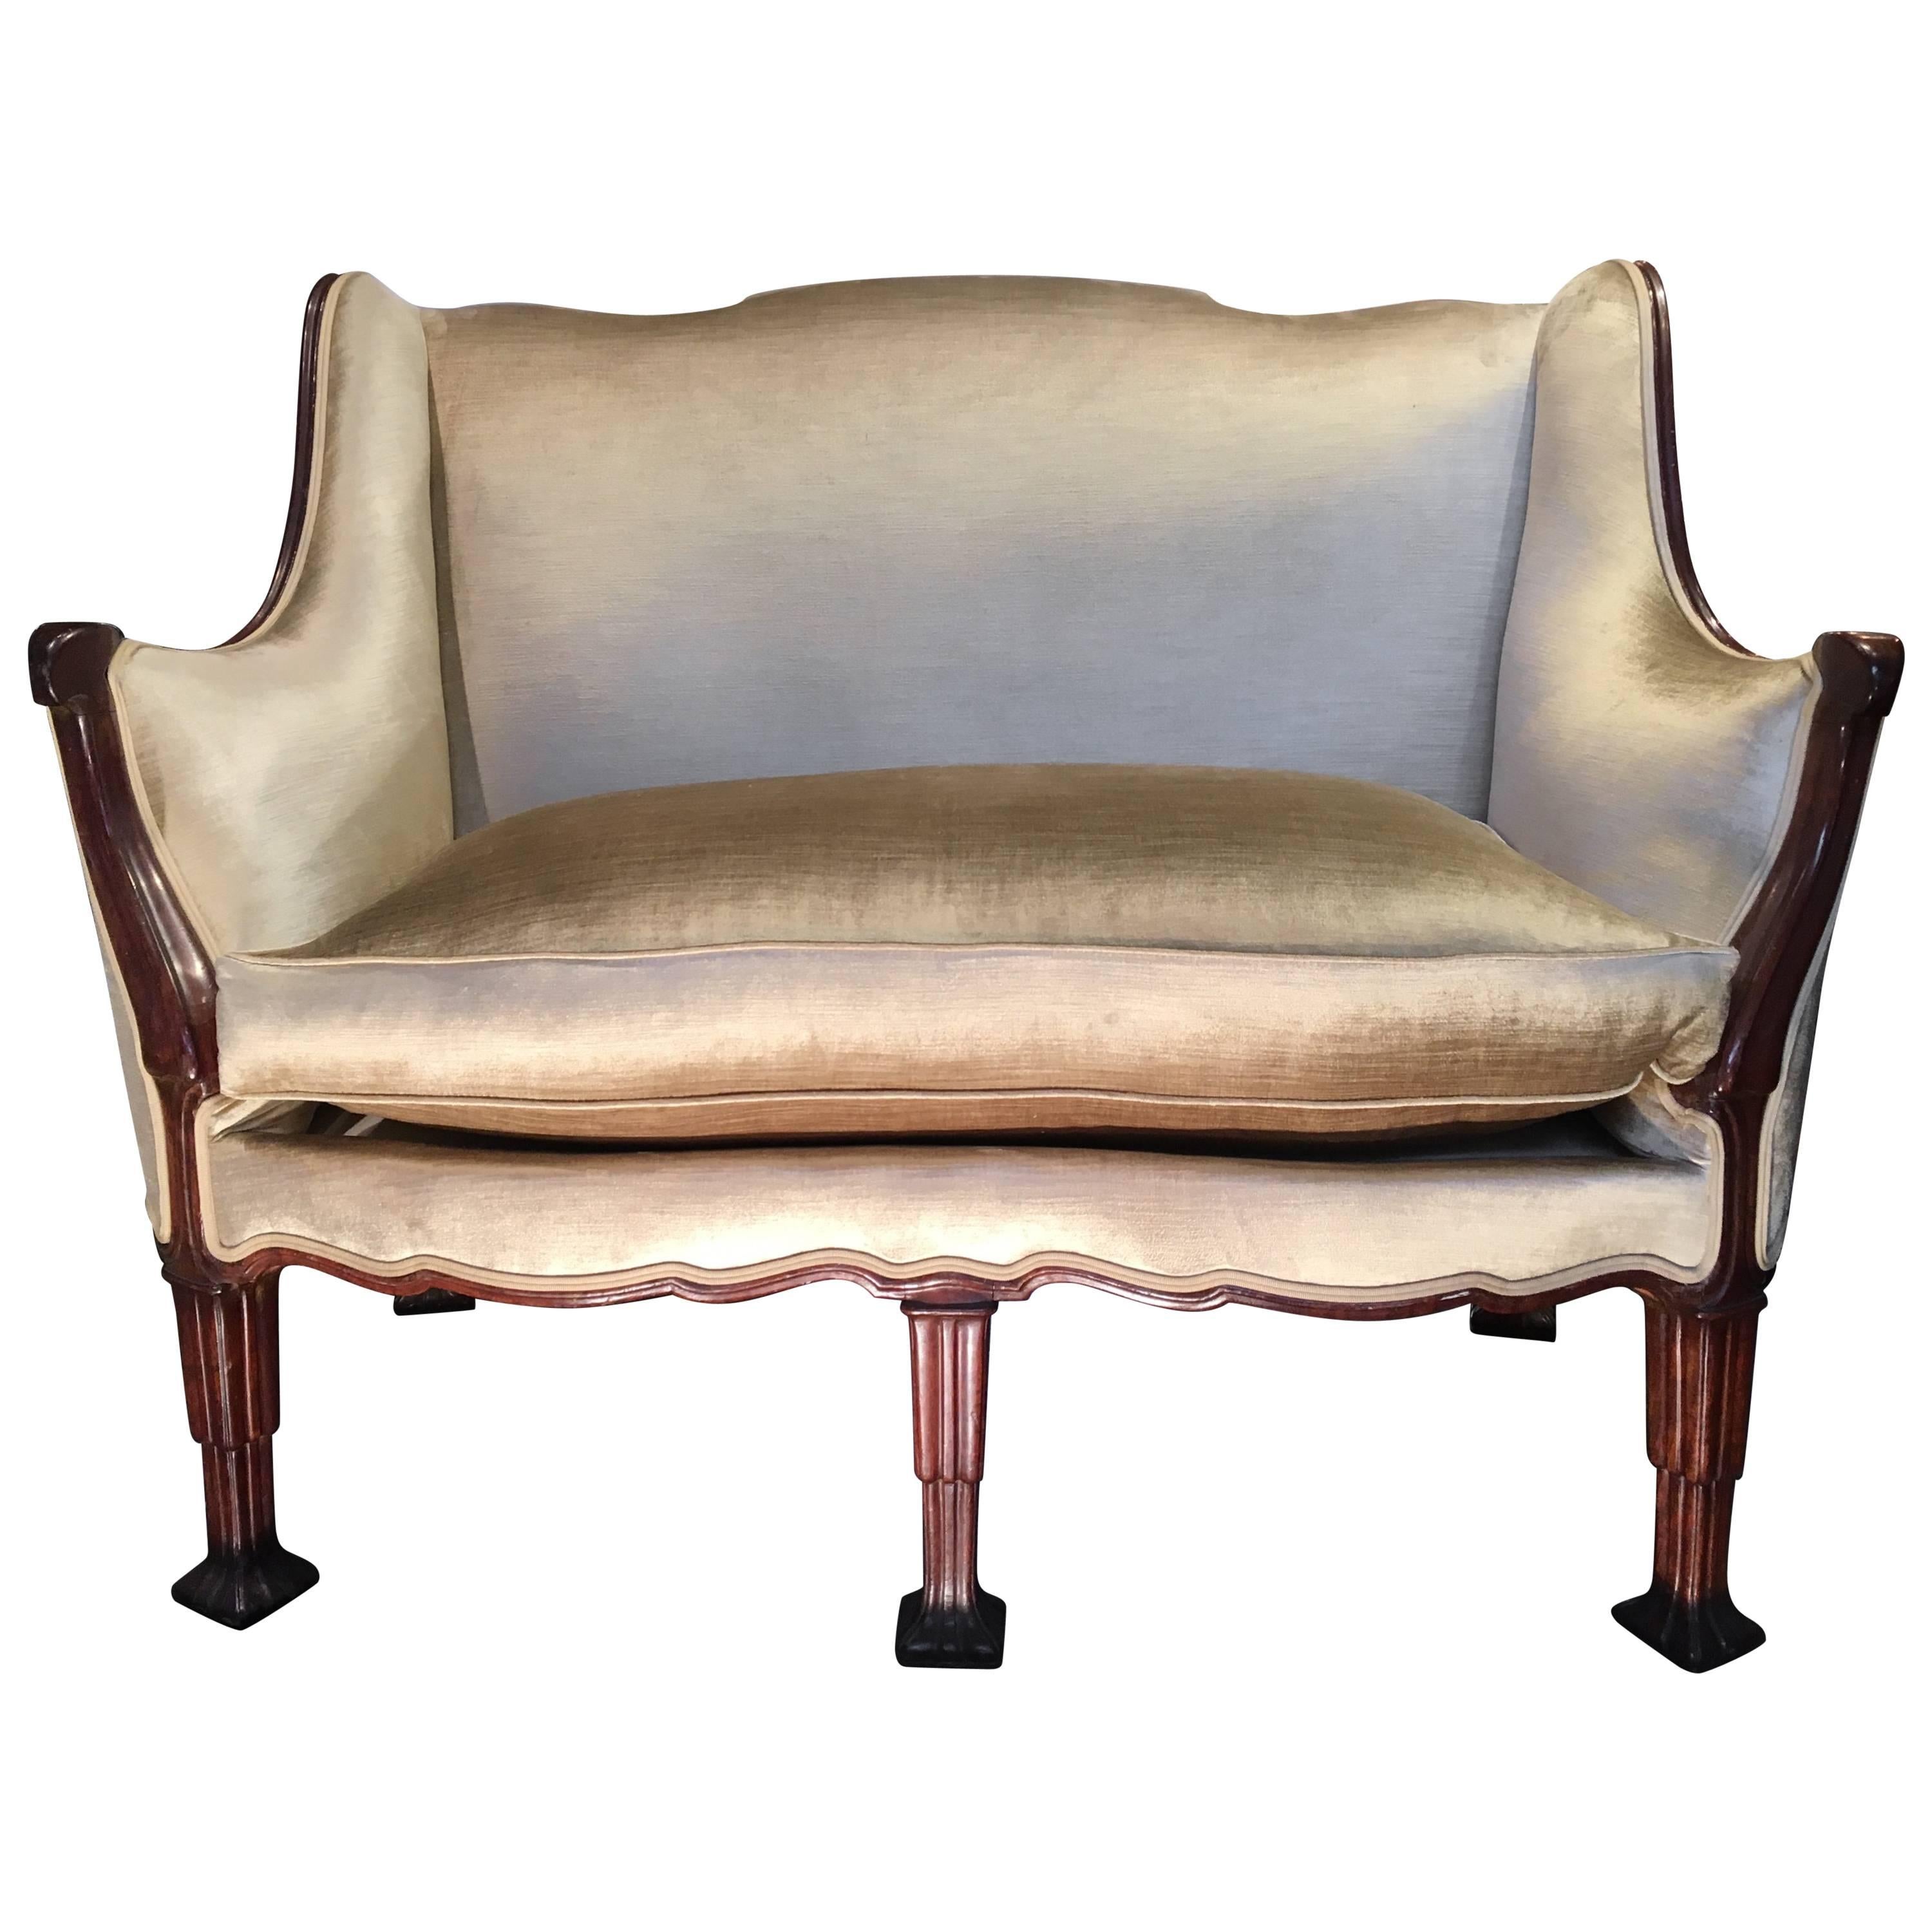 Set of English Art Nouveau Armchairs and Sofa in Mahogany, circa 1900 For Sale